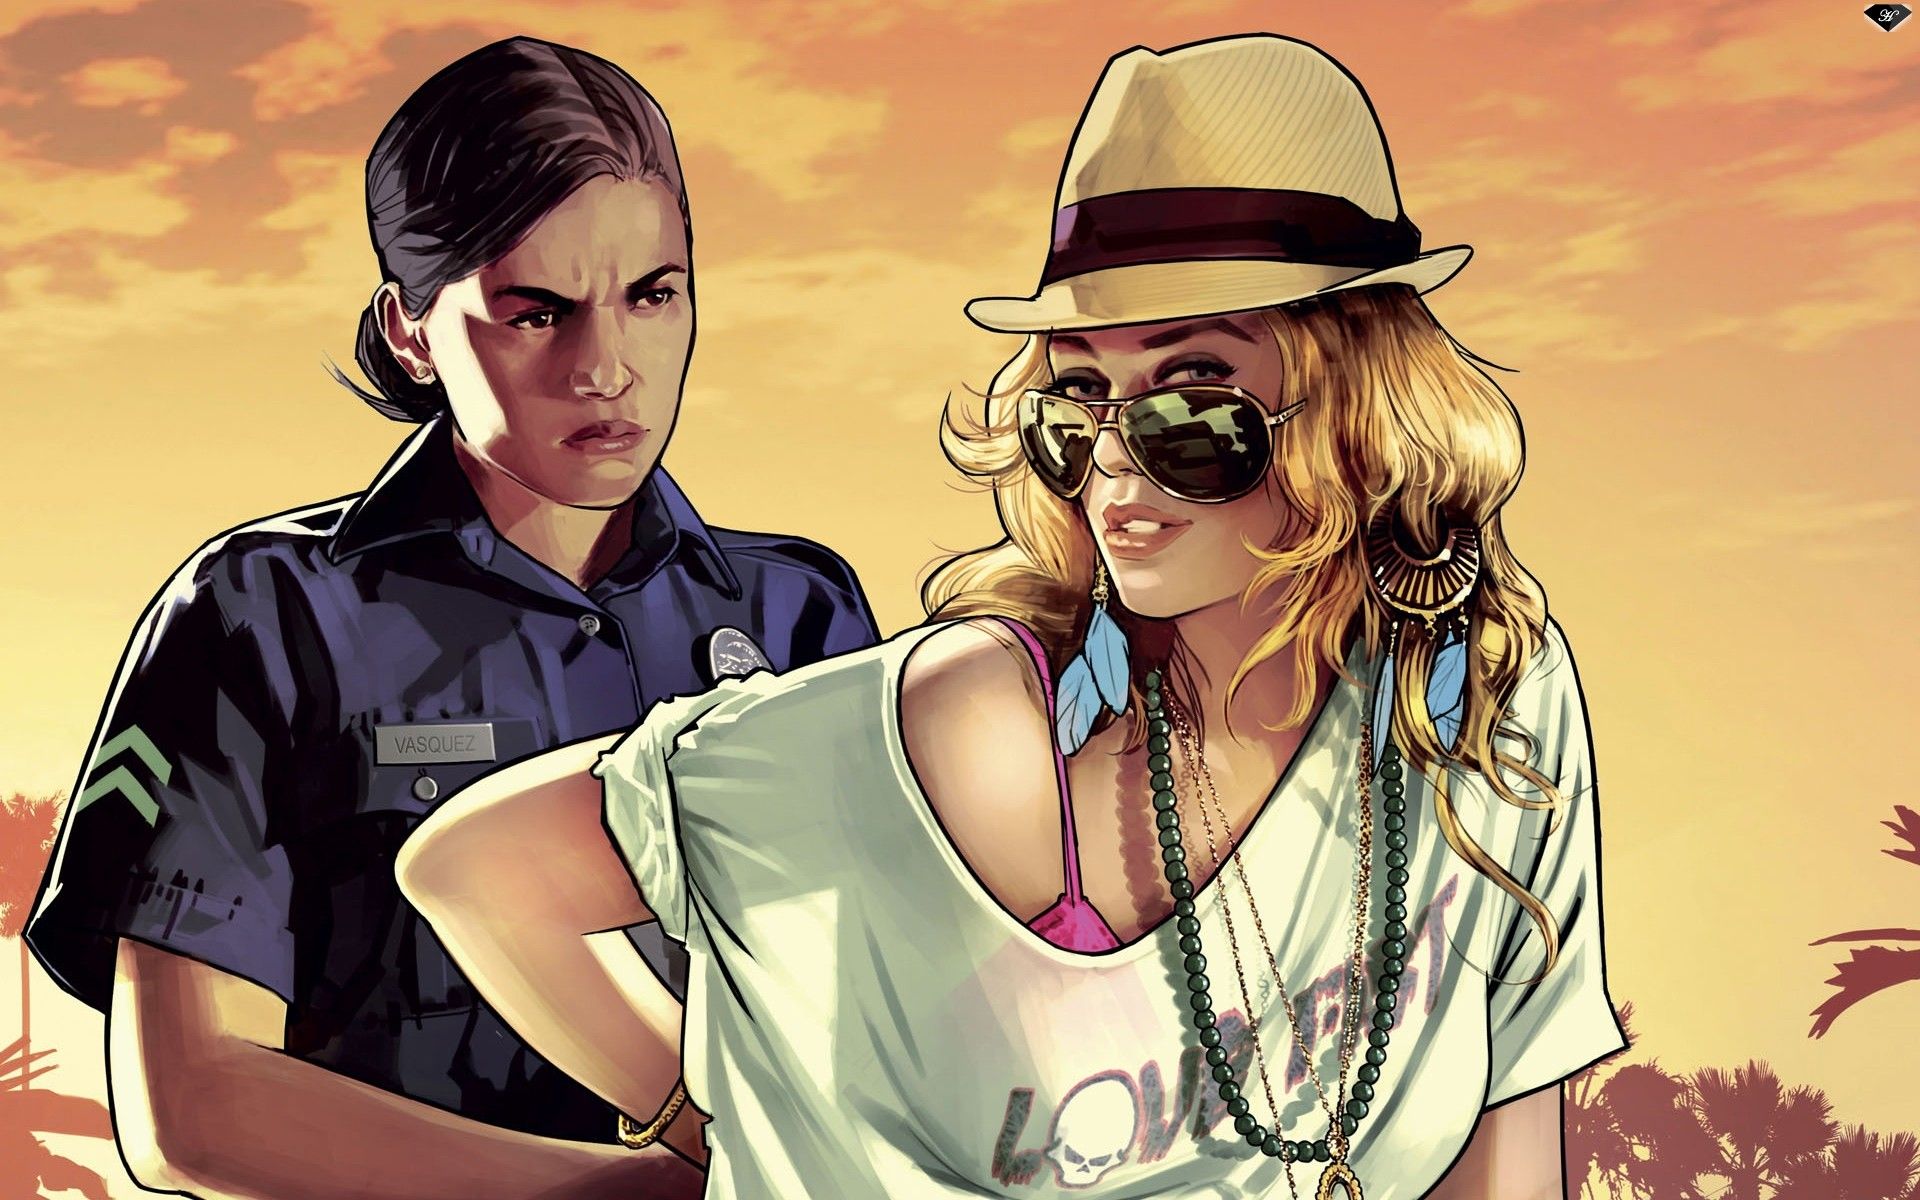 wallpapers gta 5 blonde chick